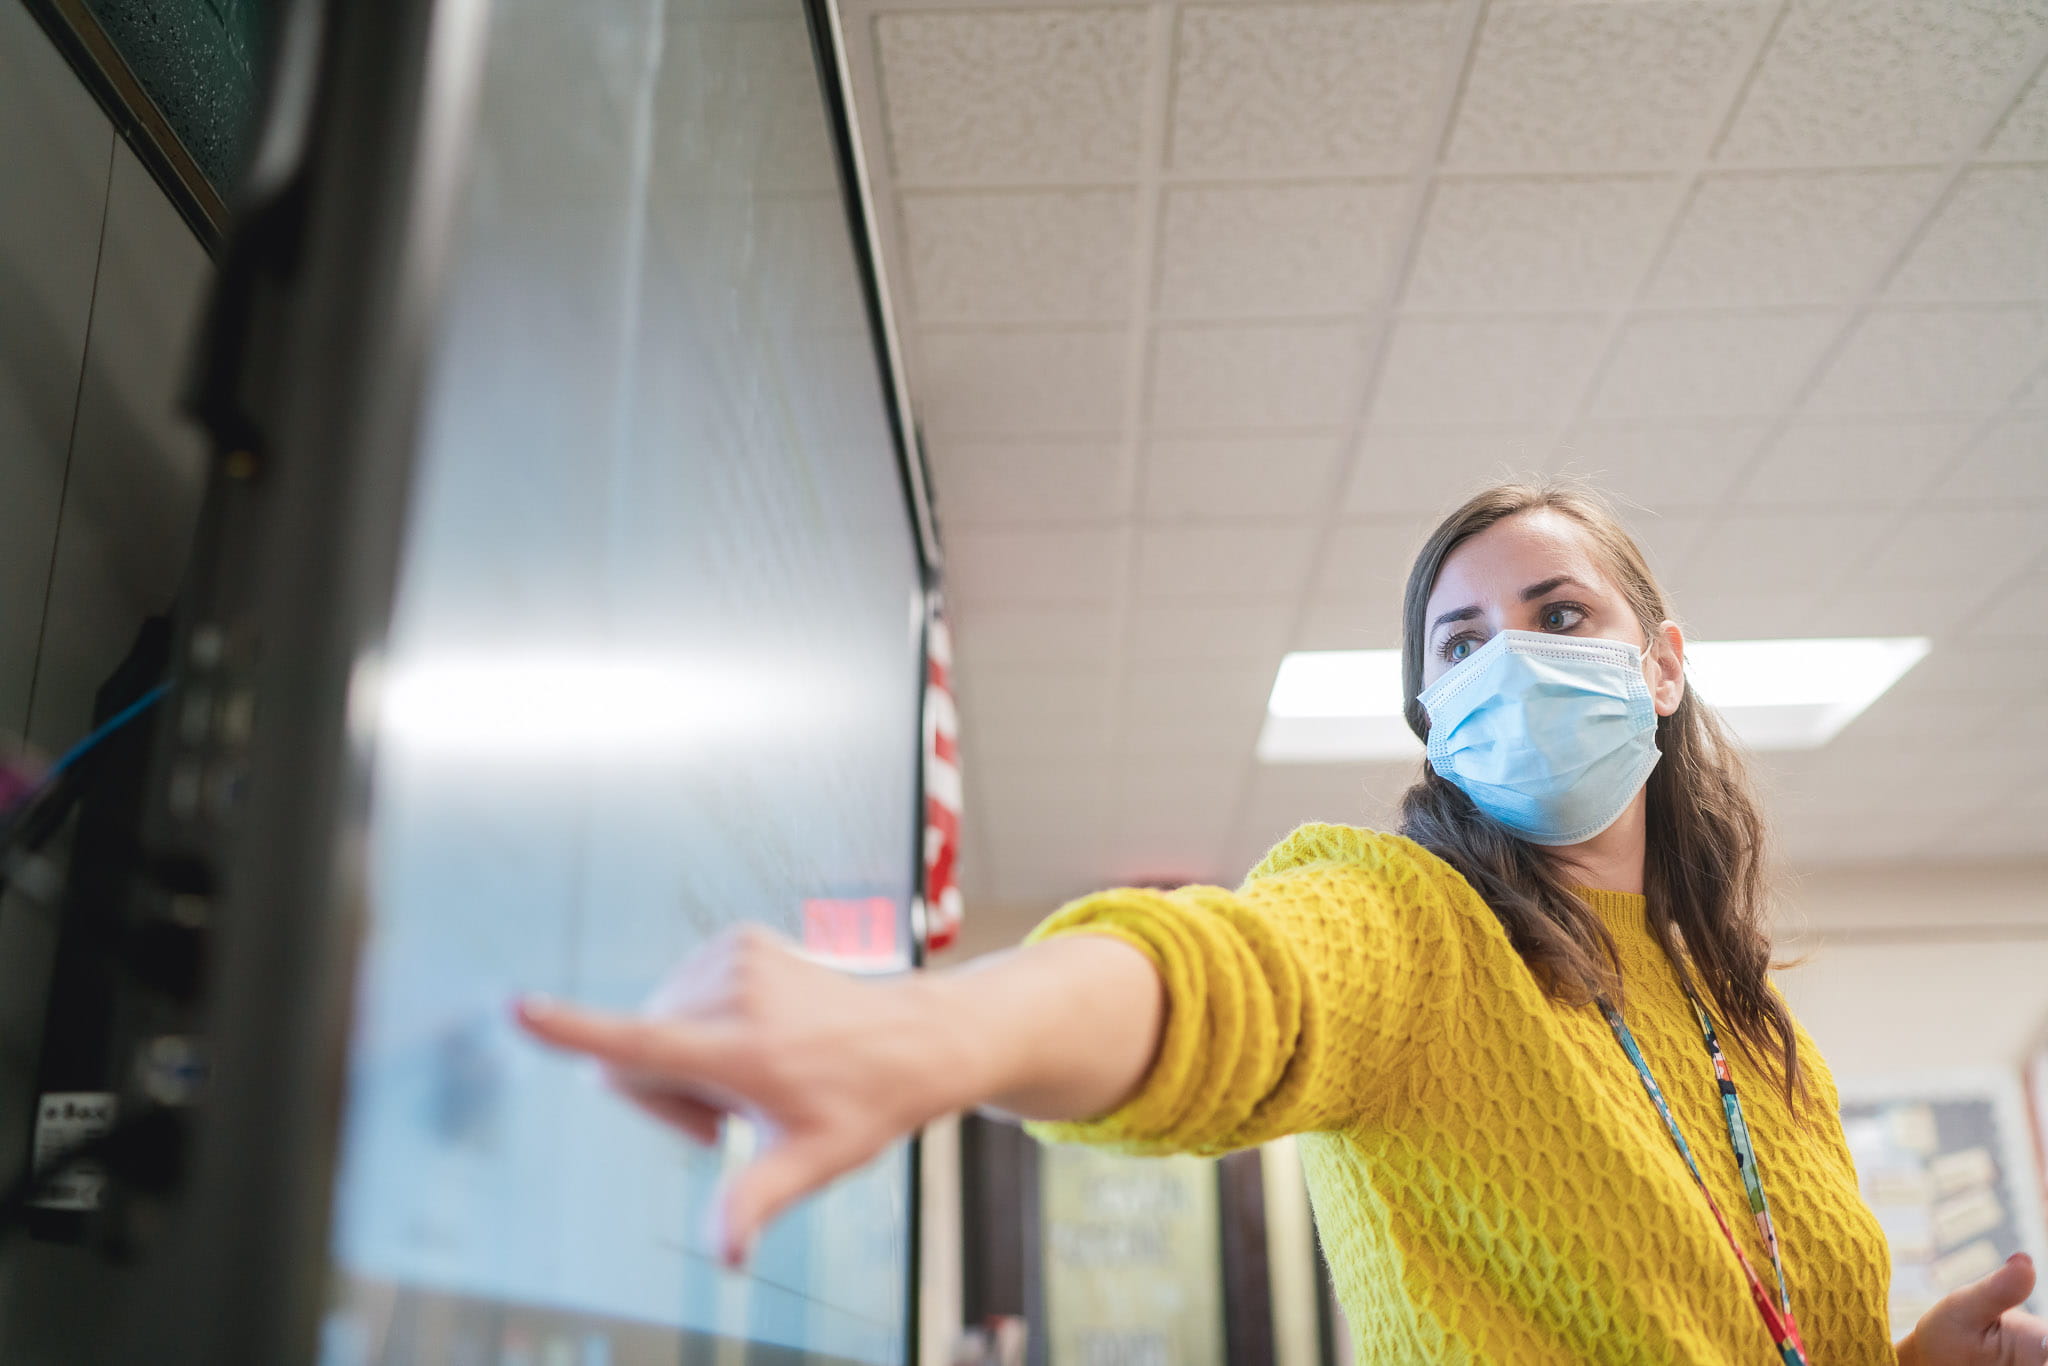 A teacher delivers a lesson at her SMART display with her mask on during the pandemic.